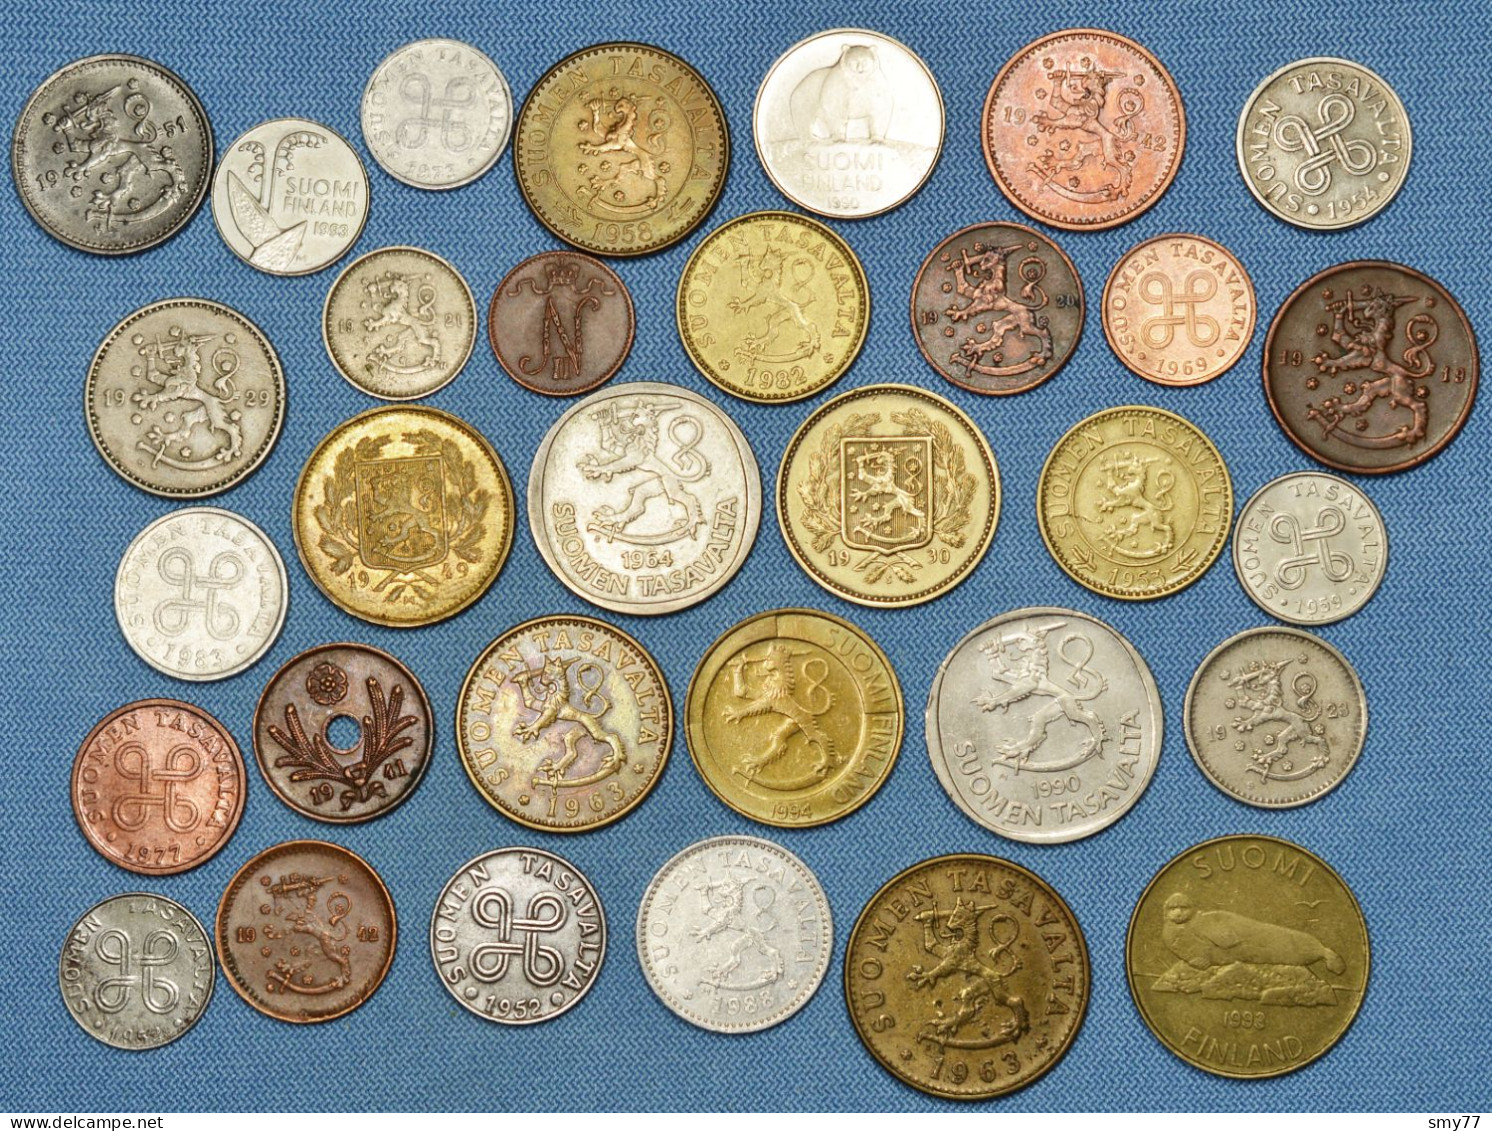 Finland / Finlande •  32x  • All Coins Different, Most Coins In High Grade, Including Silver And Scarcer Coins • [24-458 - Finland